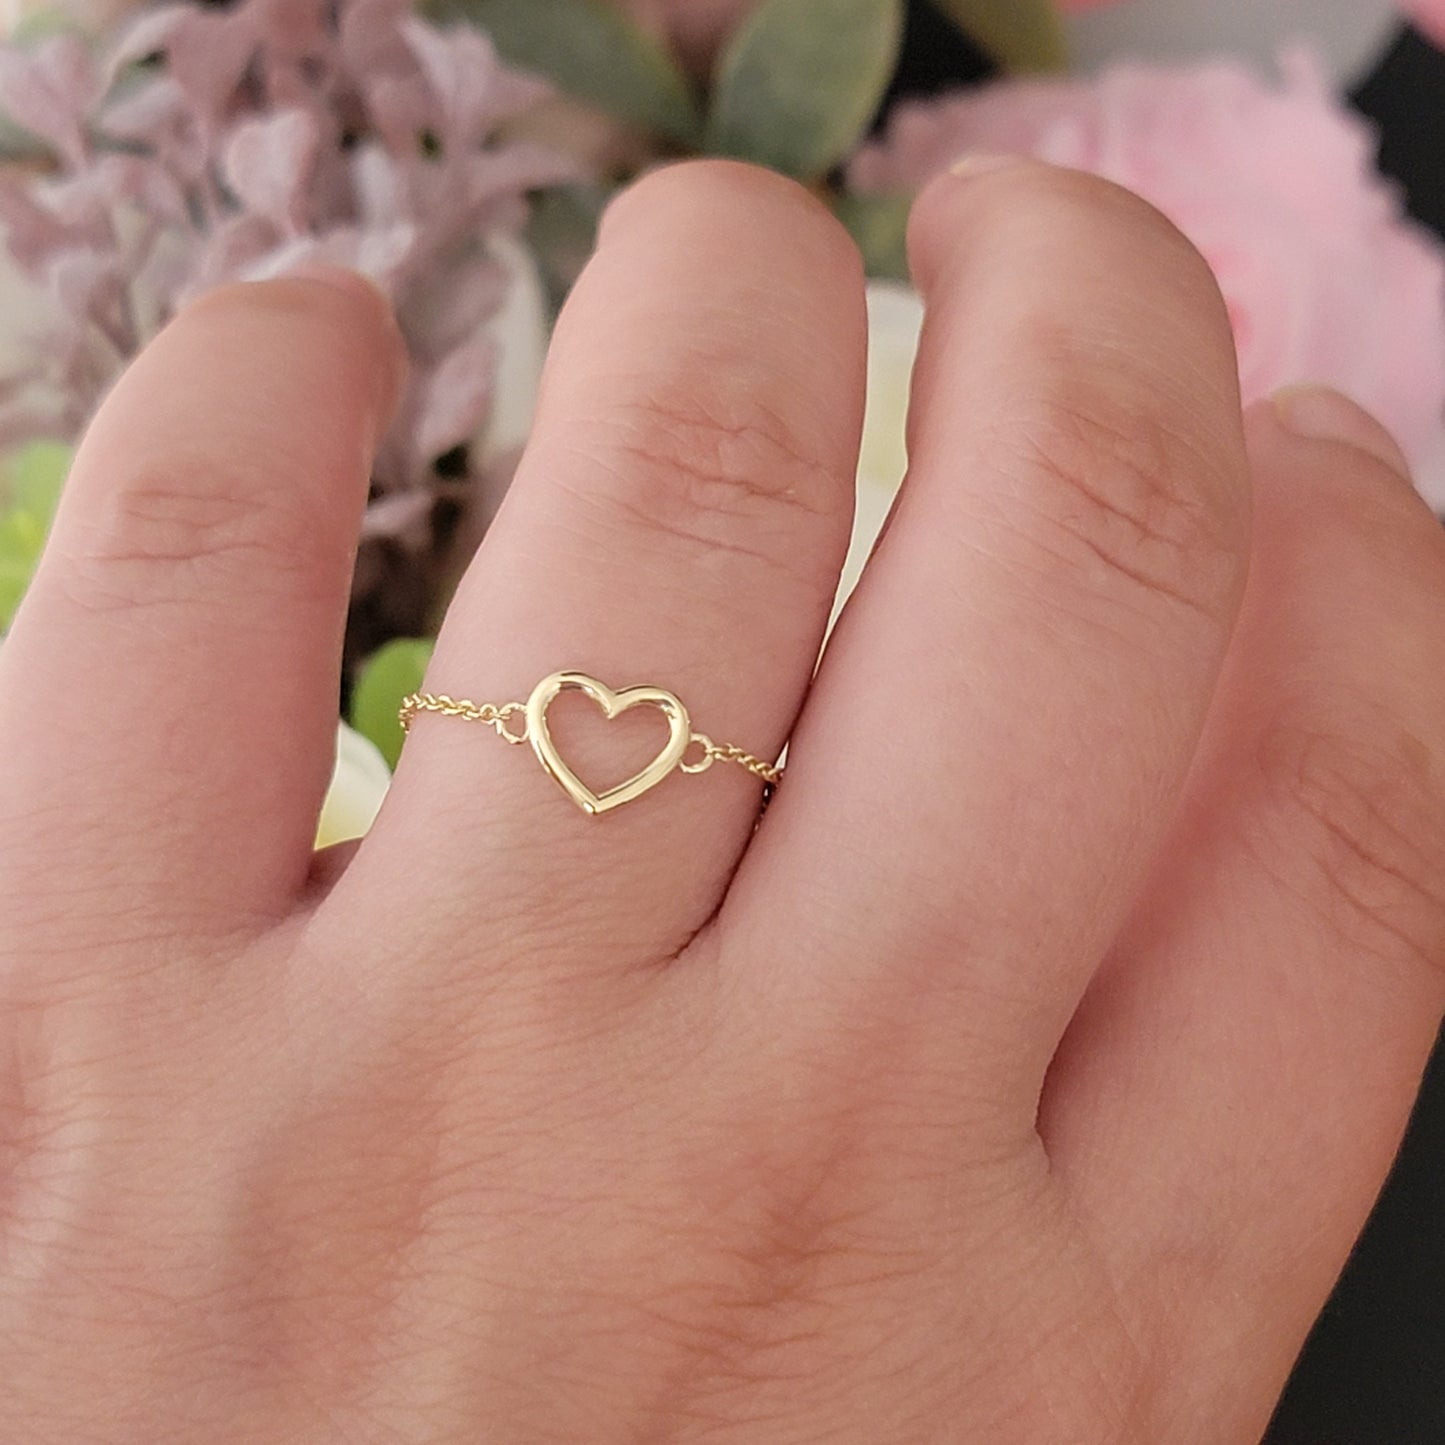 Chain Ring, 14k Solid Gold Chain Ring, Heart Chain Ring, Minimalist Ring, Dainty Ring, Gold Heart Ring, Ring for Her, Stacking Rings